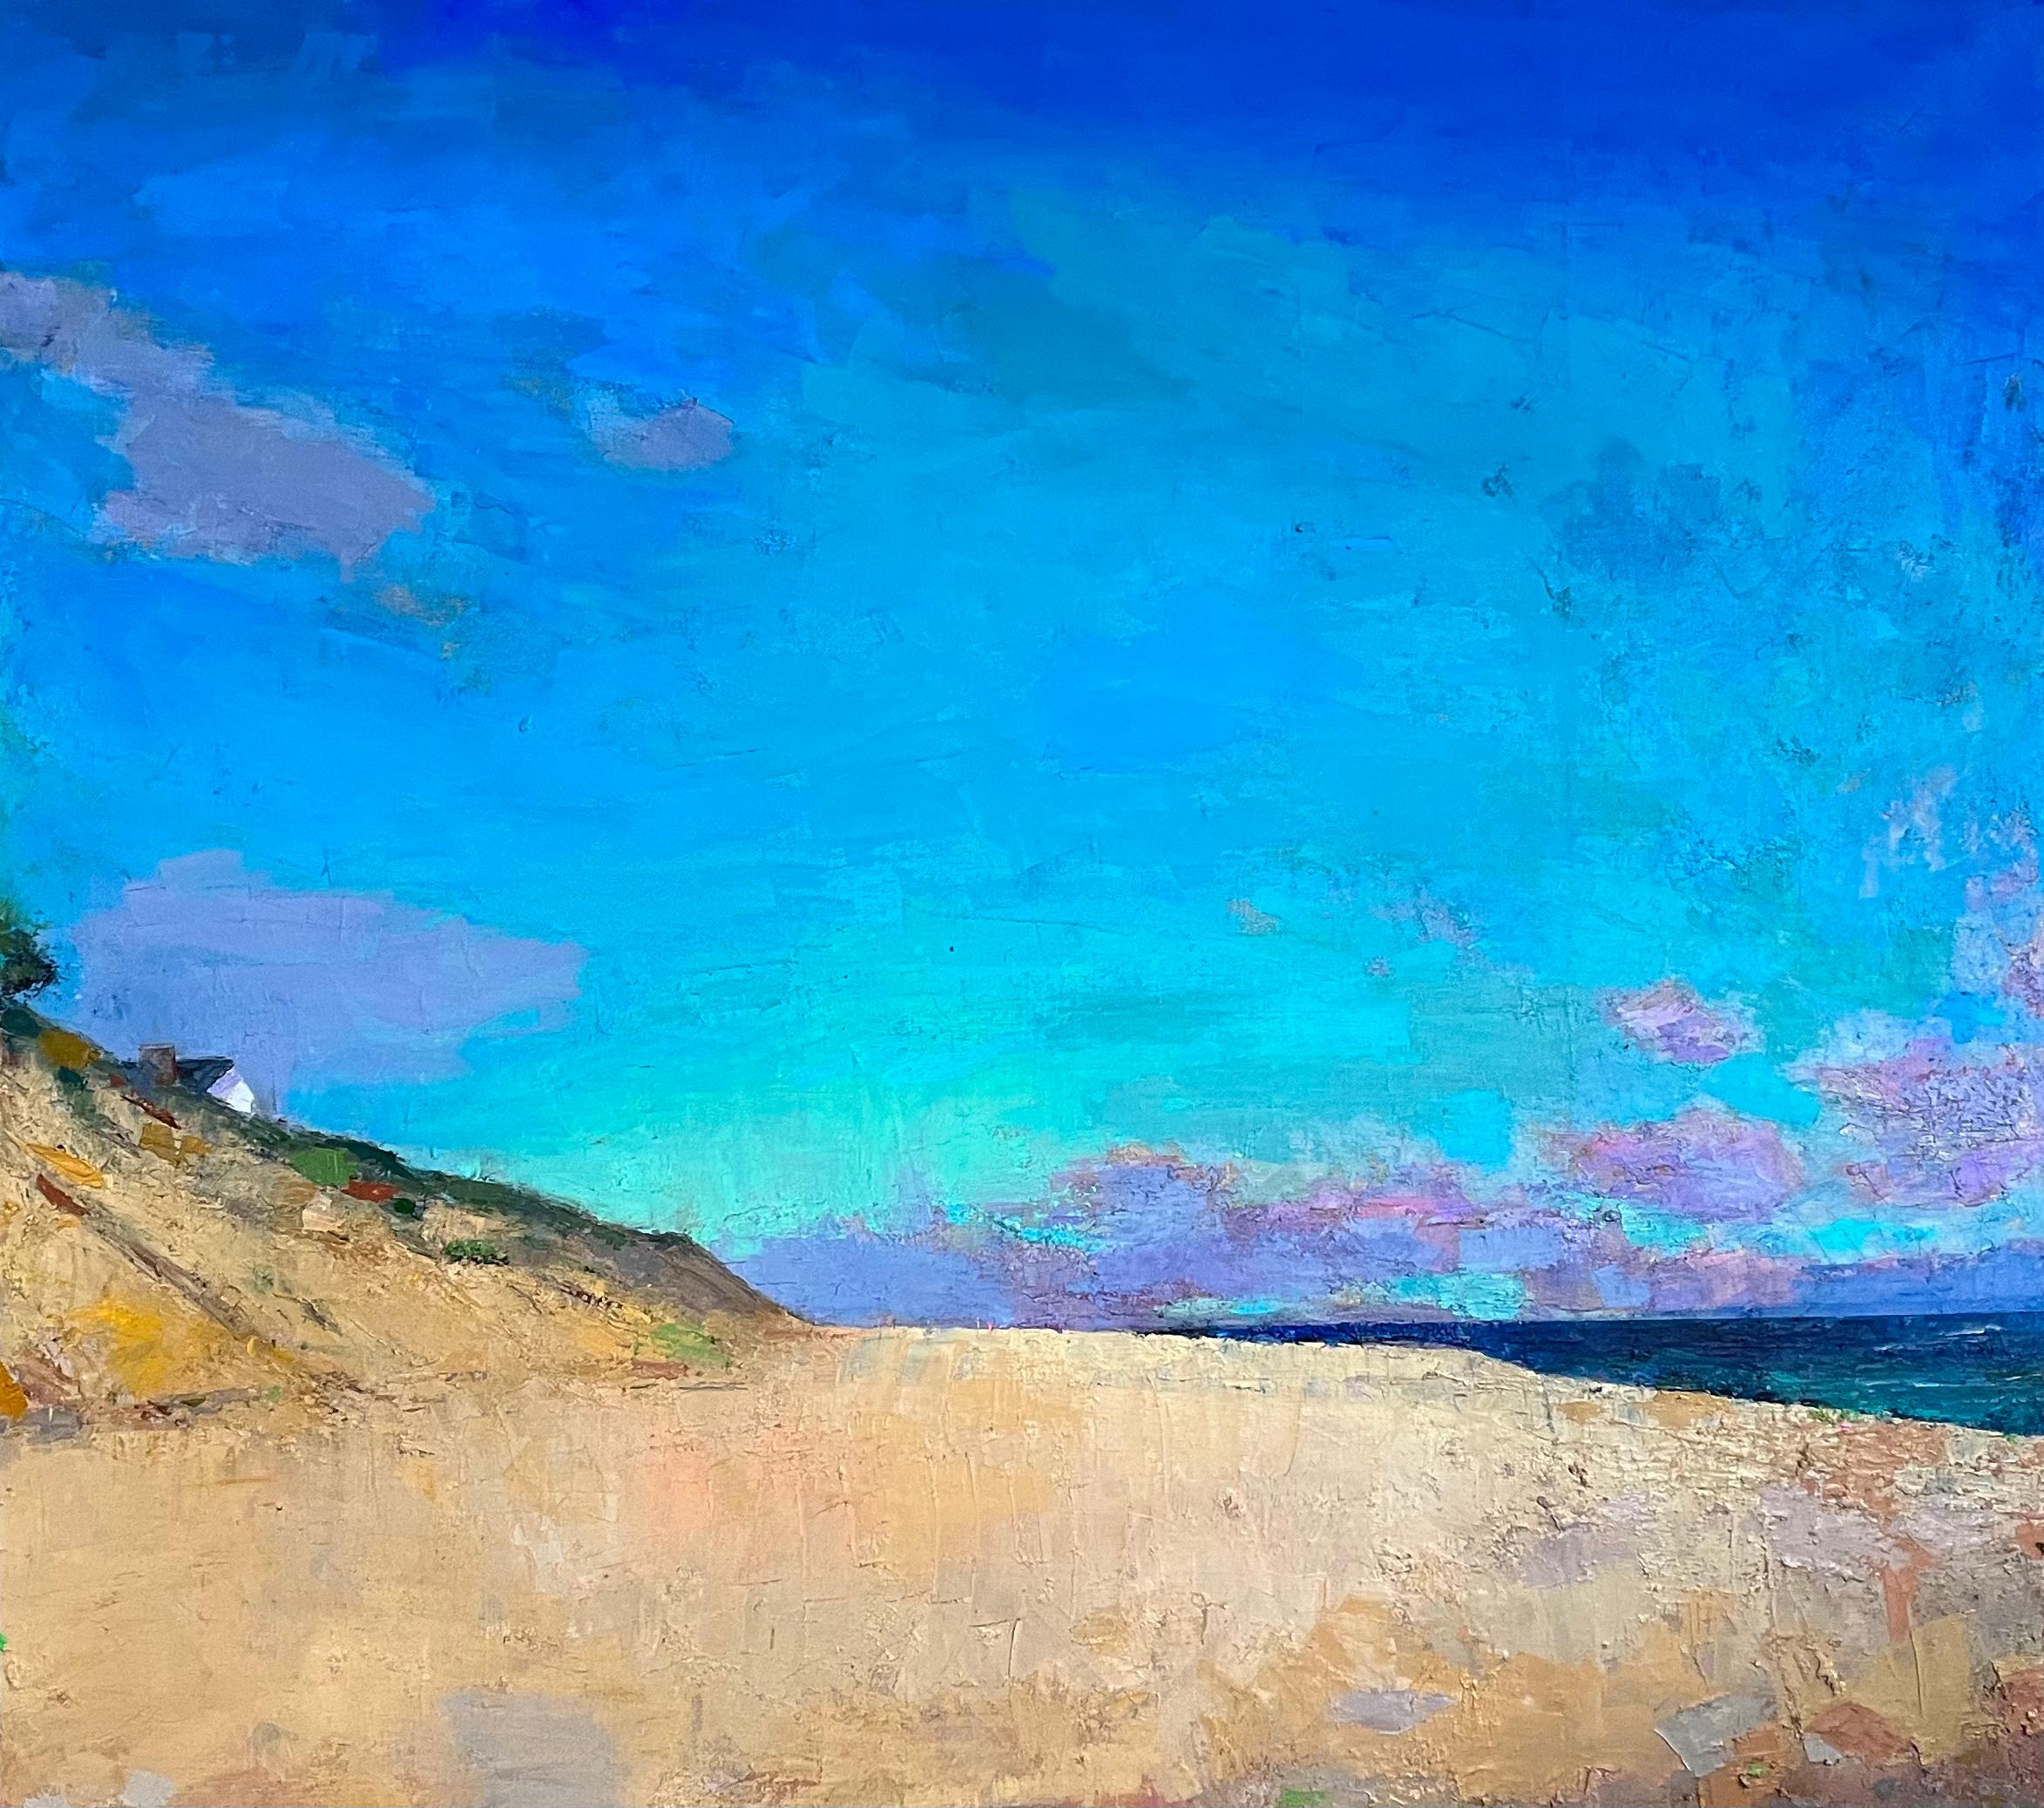 Larry Horowitz Landscape Painting - "Plein Air Morning" oil painting of the beach with vivid blue skies 